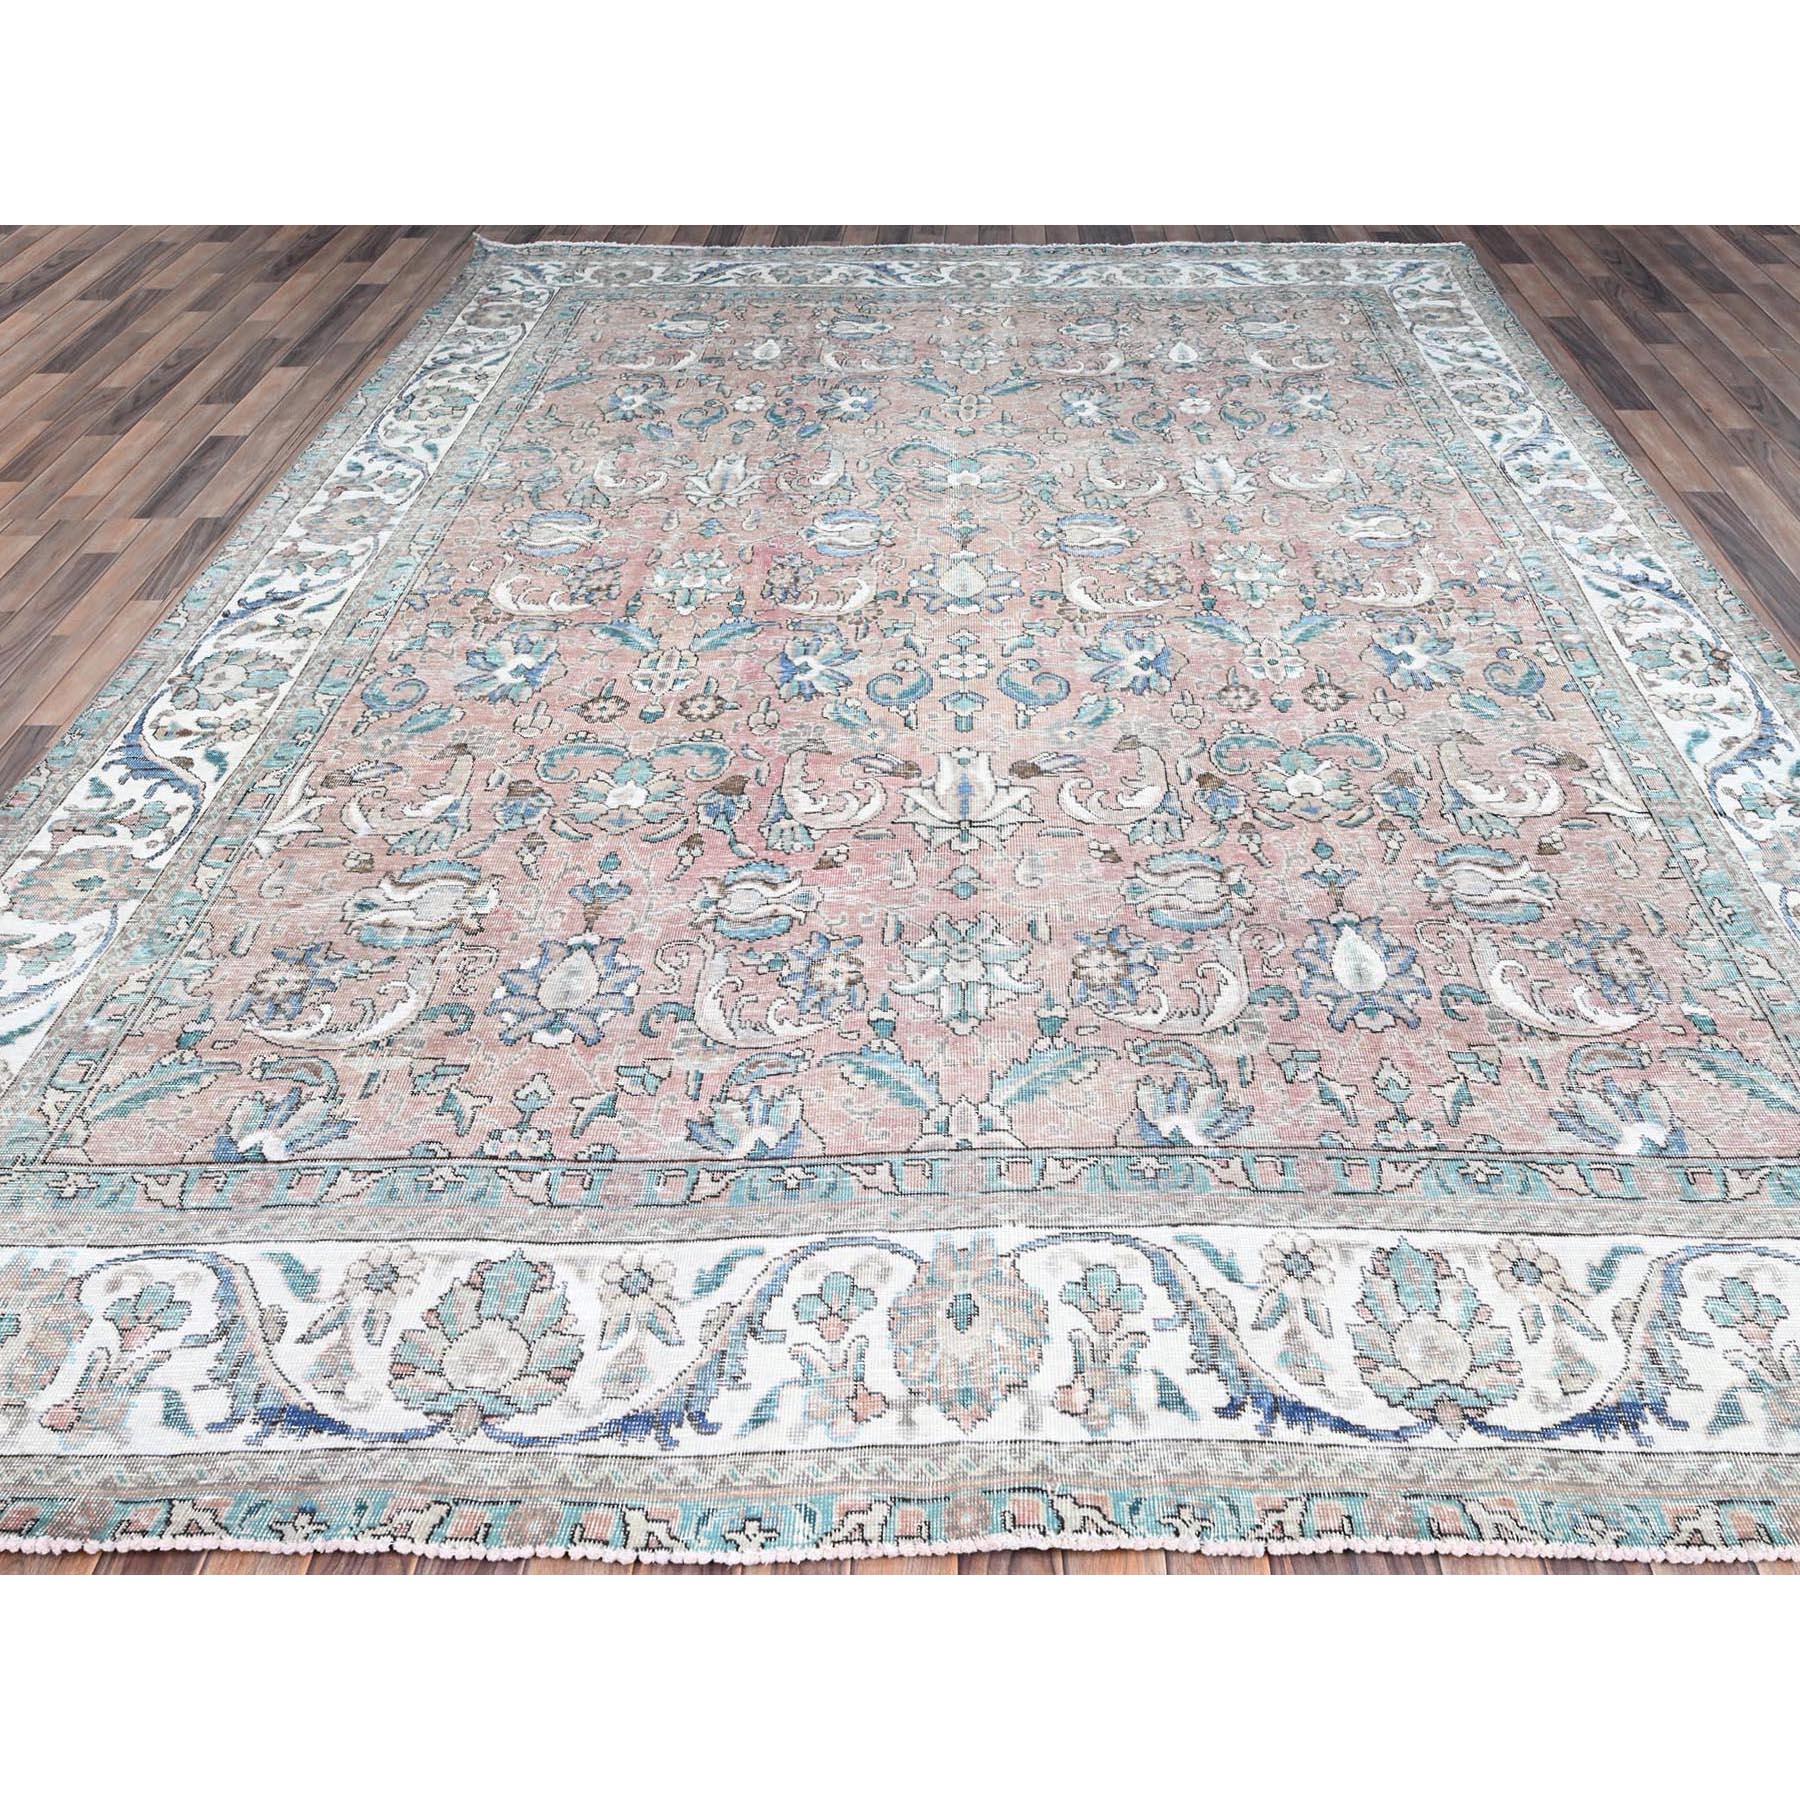 Medieval Brown Old Persian Tabriz Evenly Worn Wool Hand Knotted Distressed Look Clean Rug For Sale